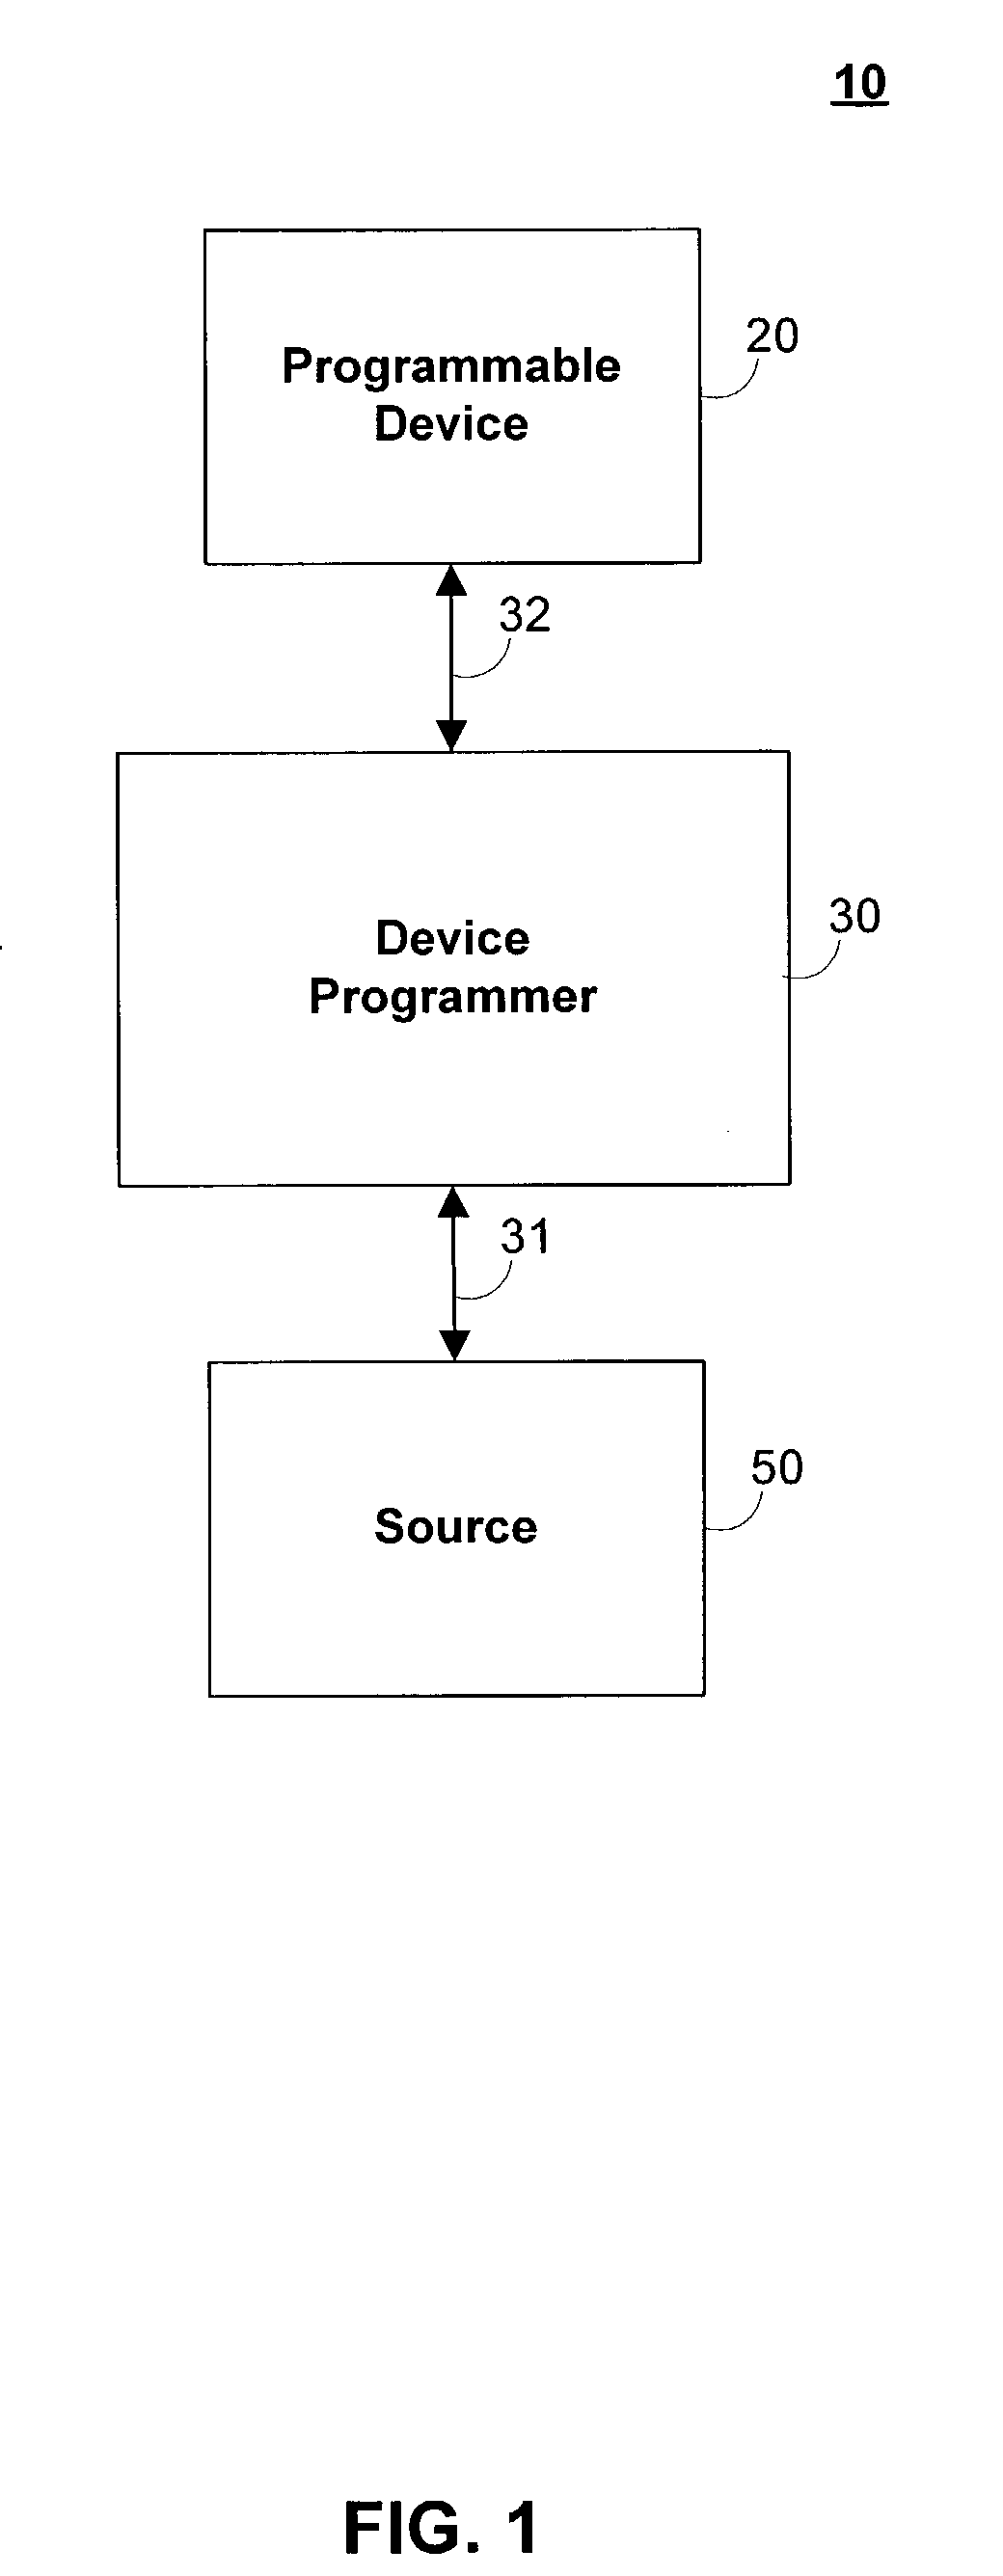 Methods and apparatuses for programming user-defined information into electronic devices